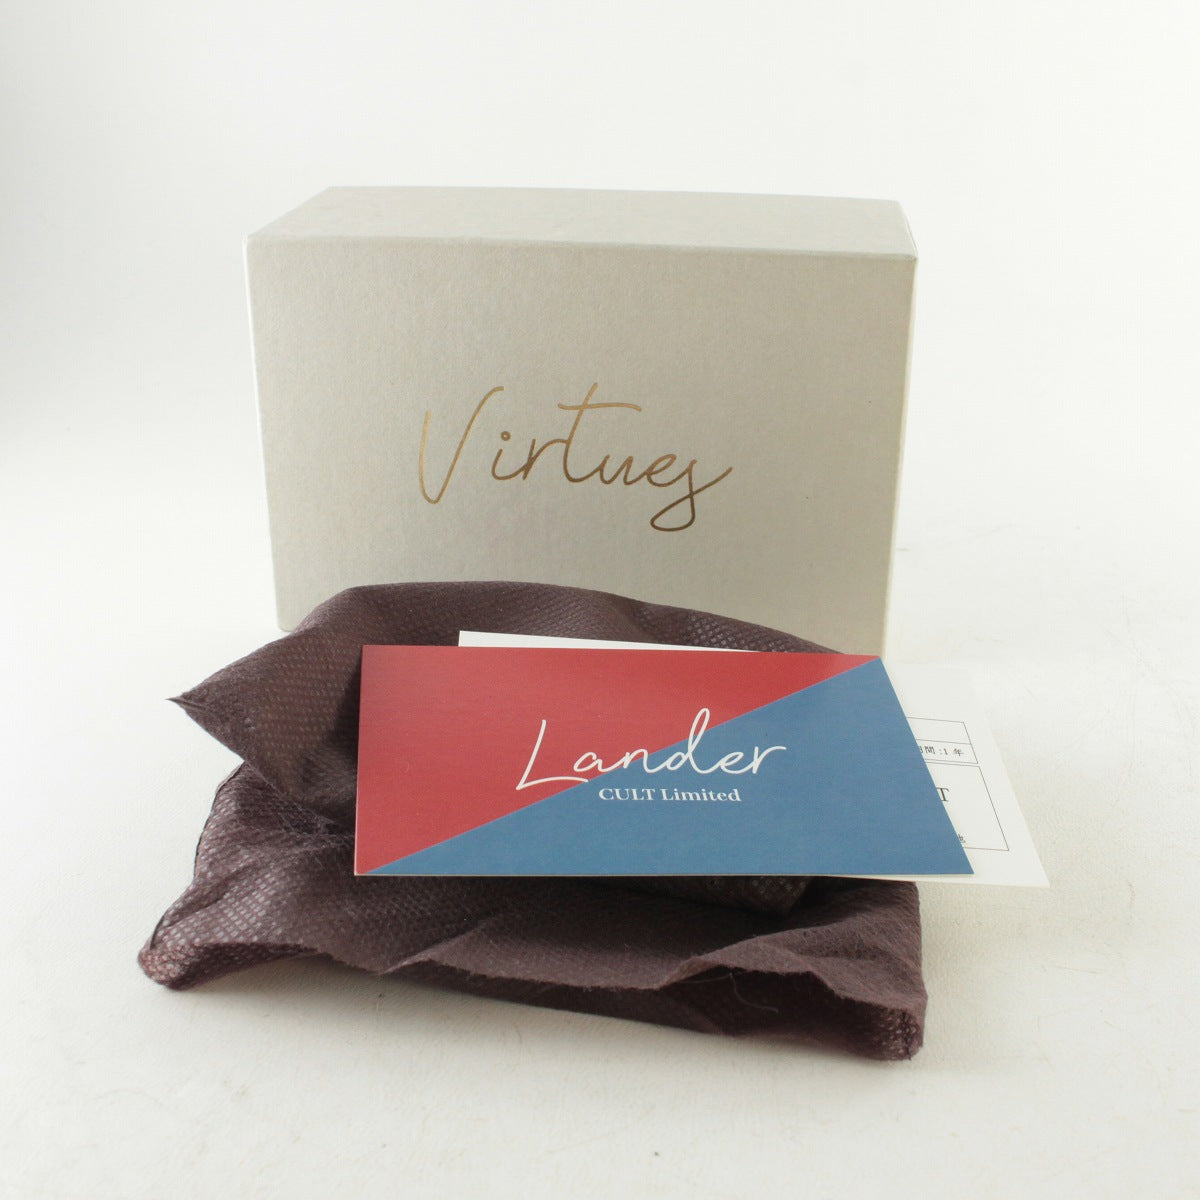 USED VIRTUES / Lander CULT Limited iss.2 [03]